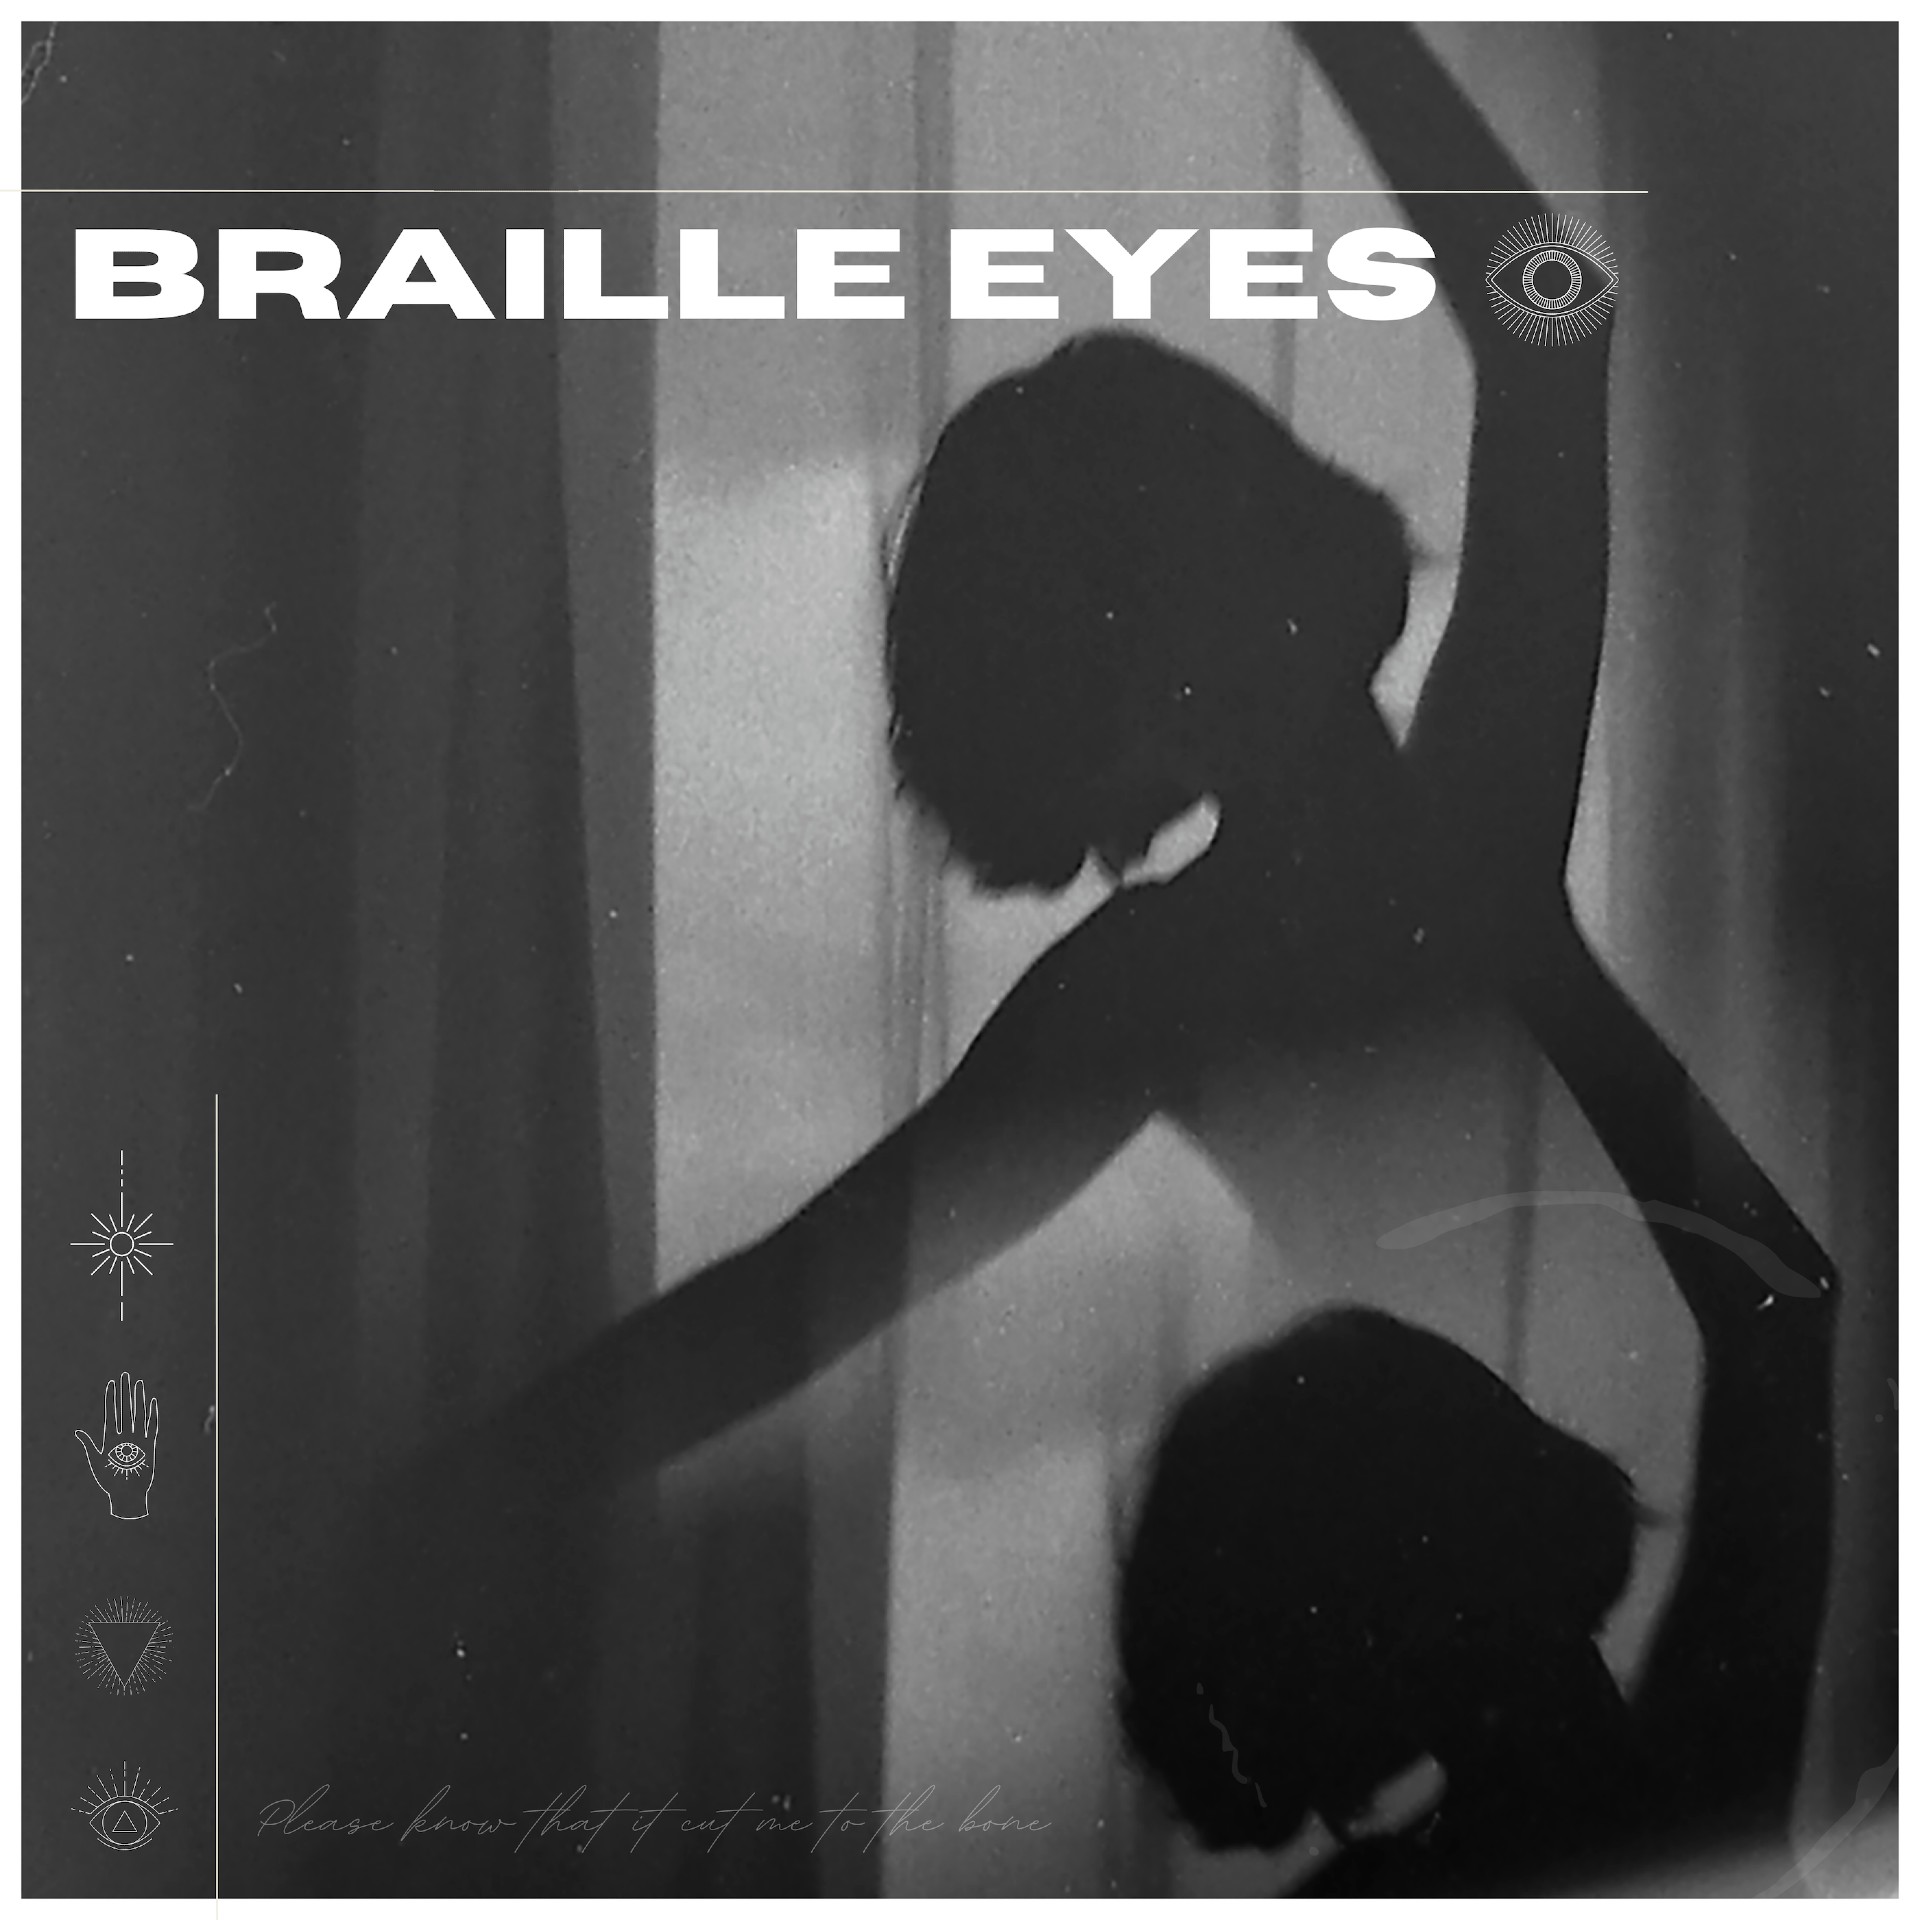 Braille Eyes ‘Please Know That It Cut Me To The Bone’ EP album artwork